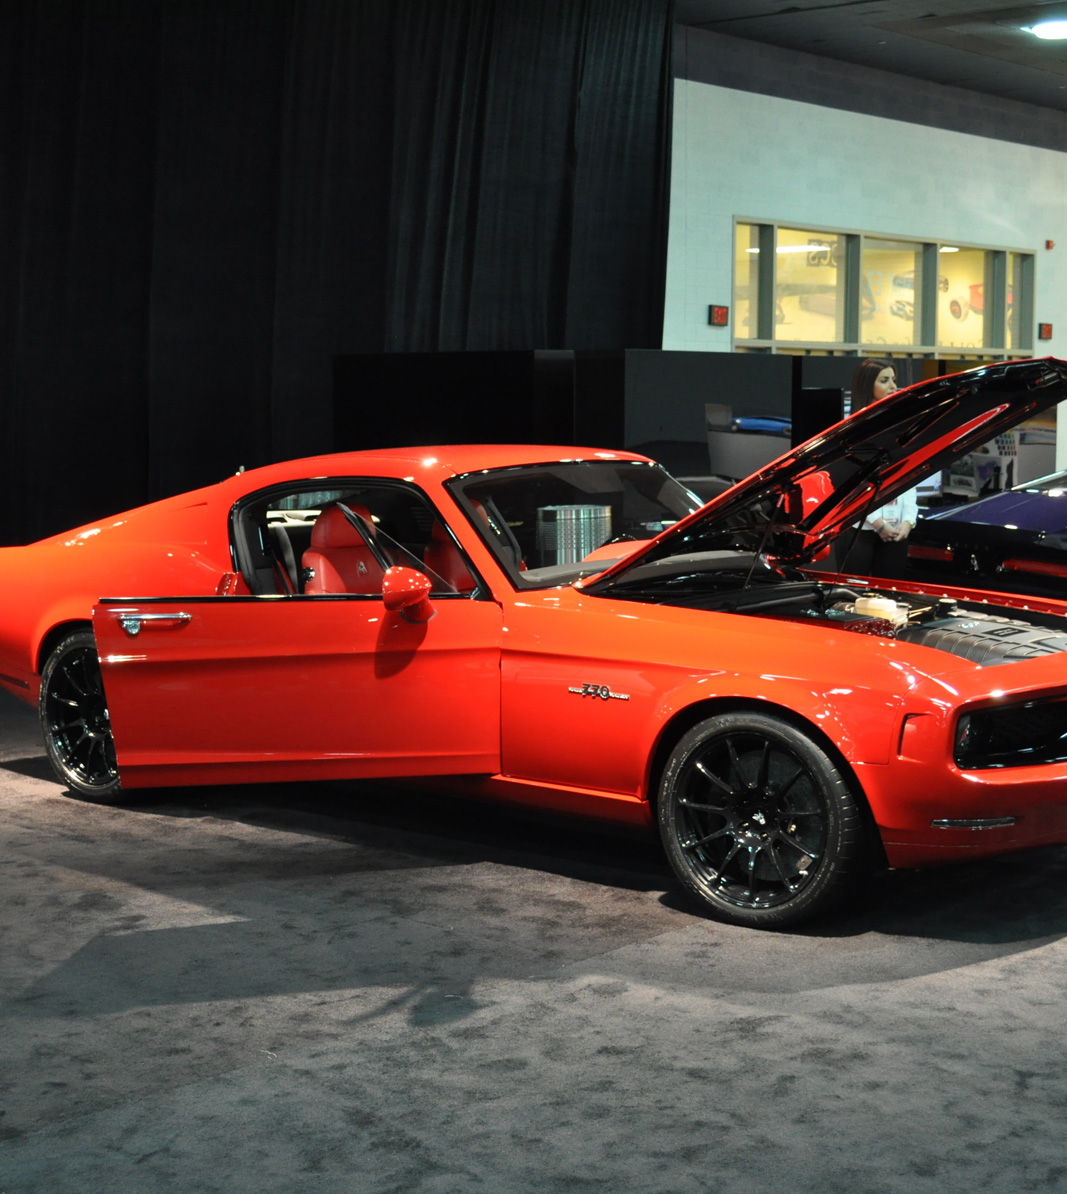 Equus Bass770 is more than just a muscle car